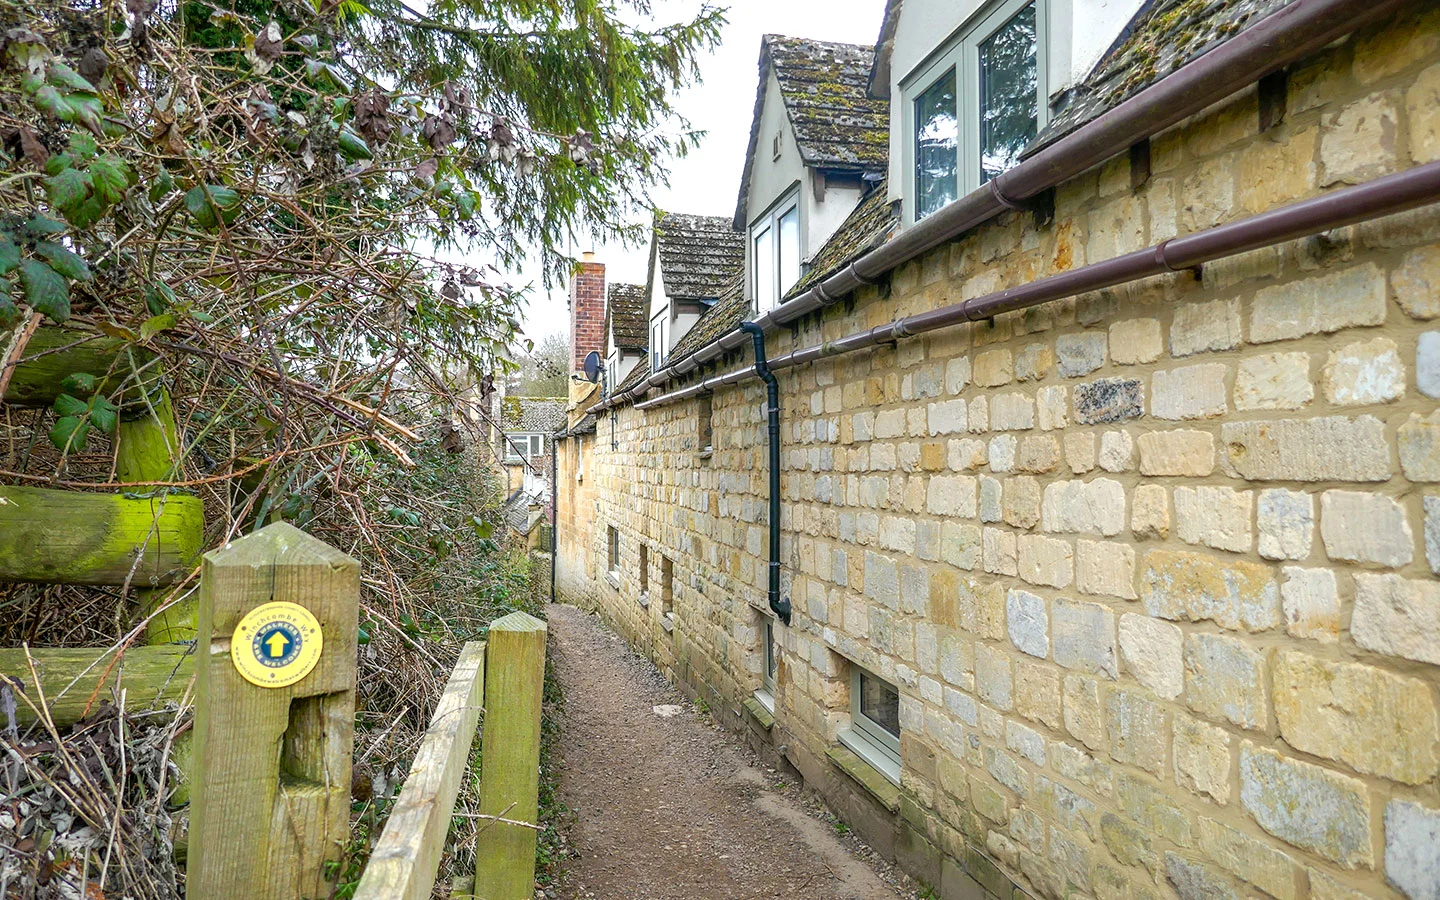 Narrow footpath next to houses leading into Winchcombe